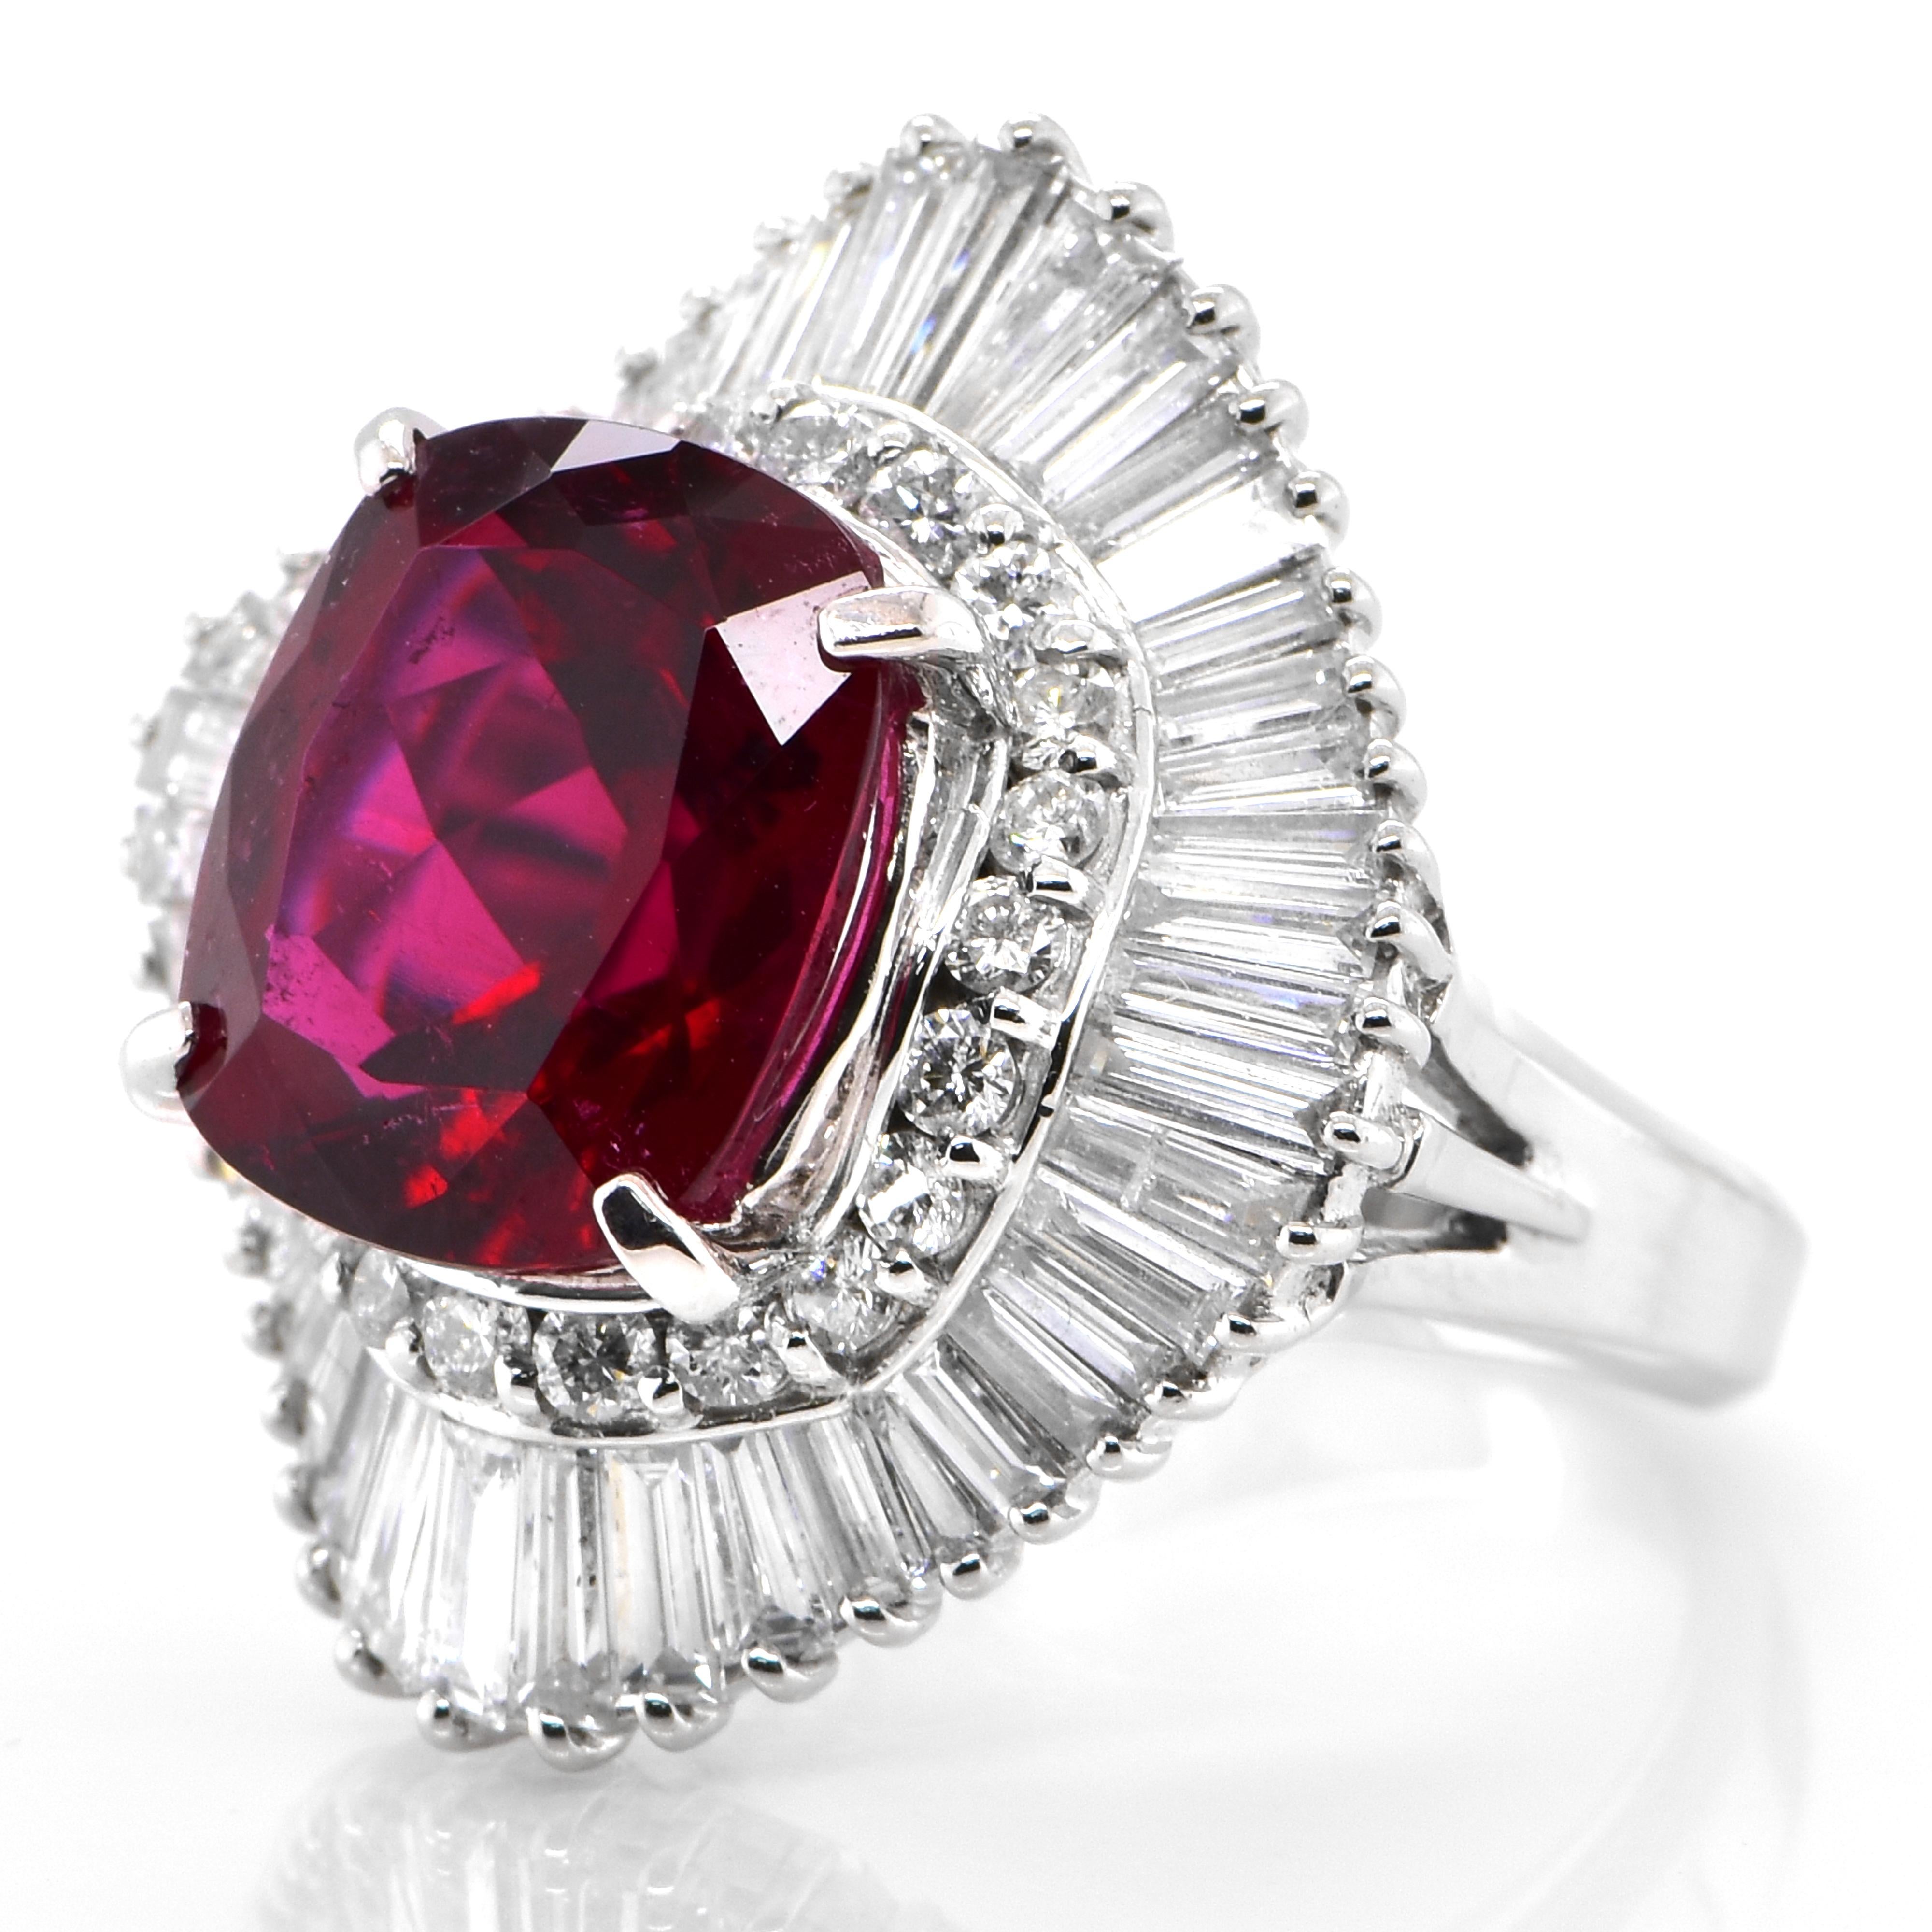 A stunning Cocktail Ring featuring 5.85 Carats of Natural Rubellite Tourmaline and 2.21 Carats of Diamond Accents set in Platinum. Tourmalines were first discovered by Spanish conquistadors in Brazil in 1500s. The name Tourmaline comes from